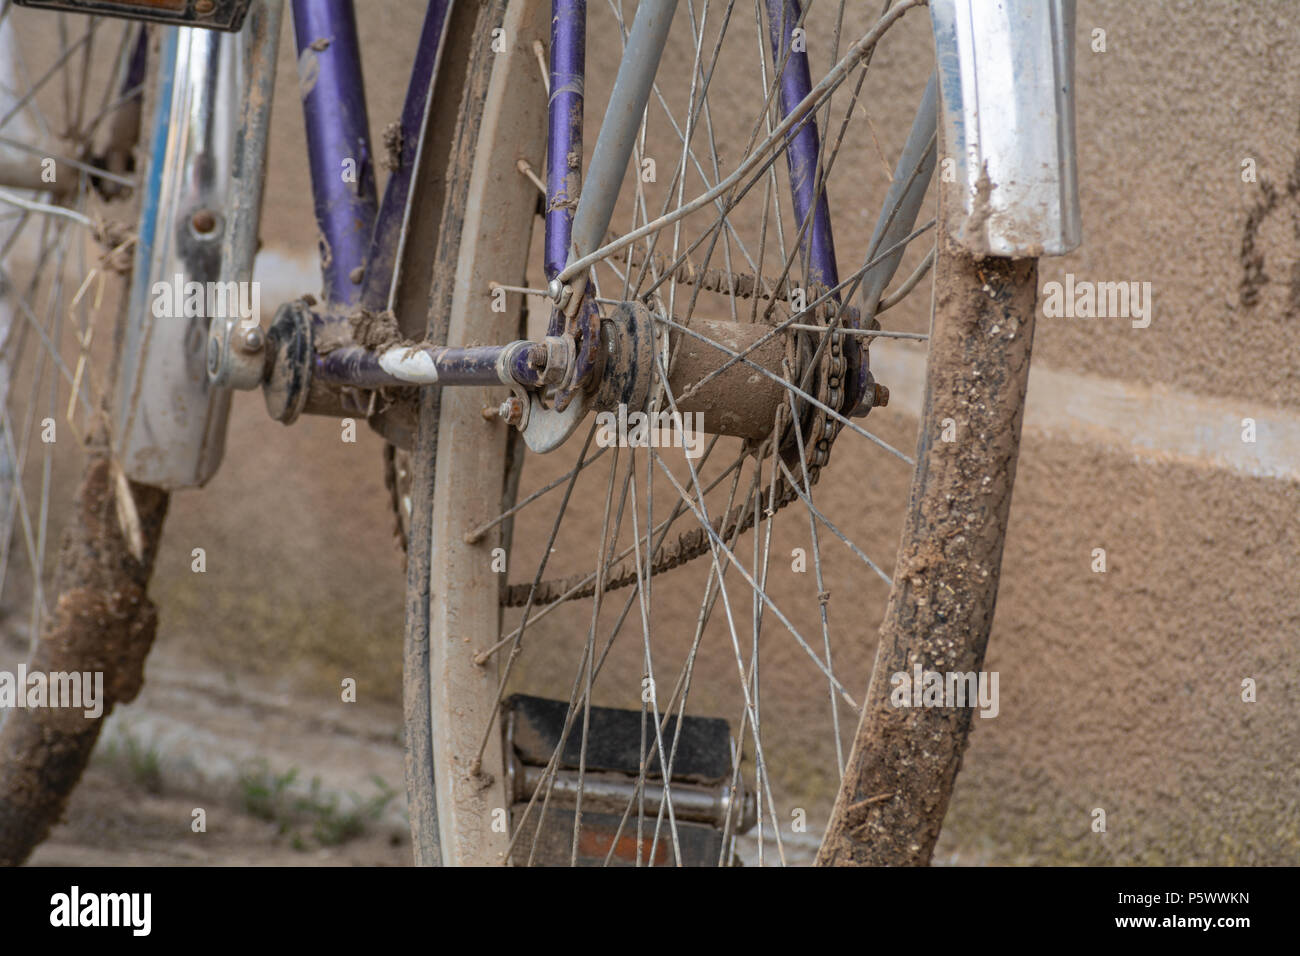 Close-up of a rusty old bicycle rear wheel with spokes Stock Photo